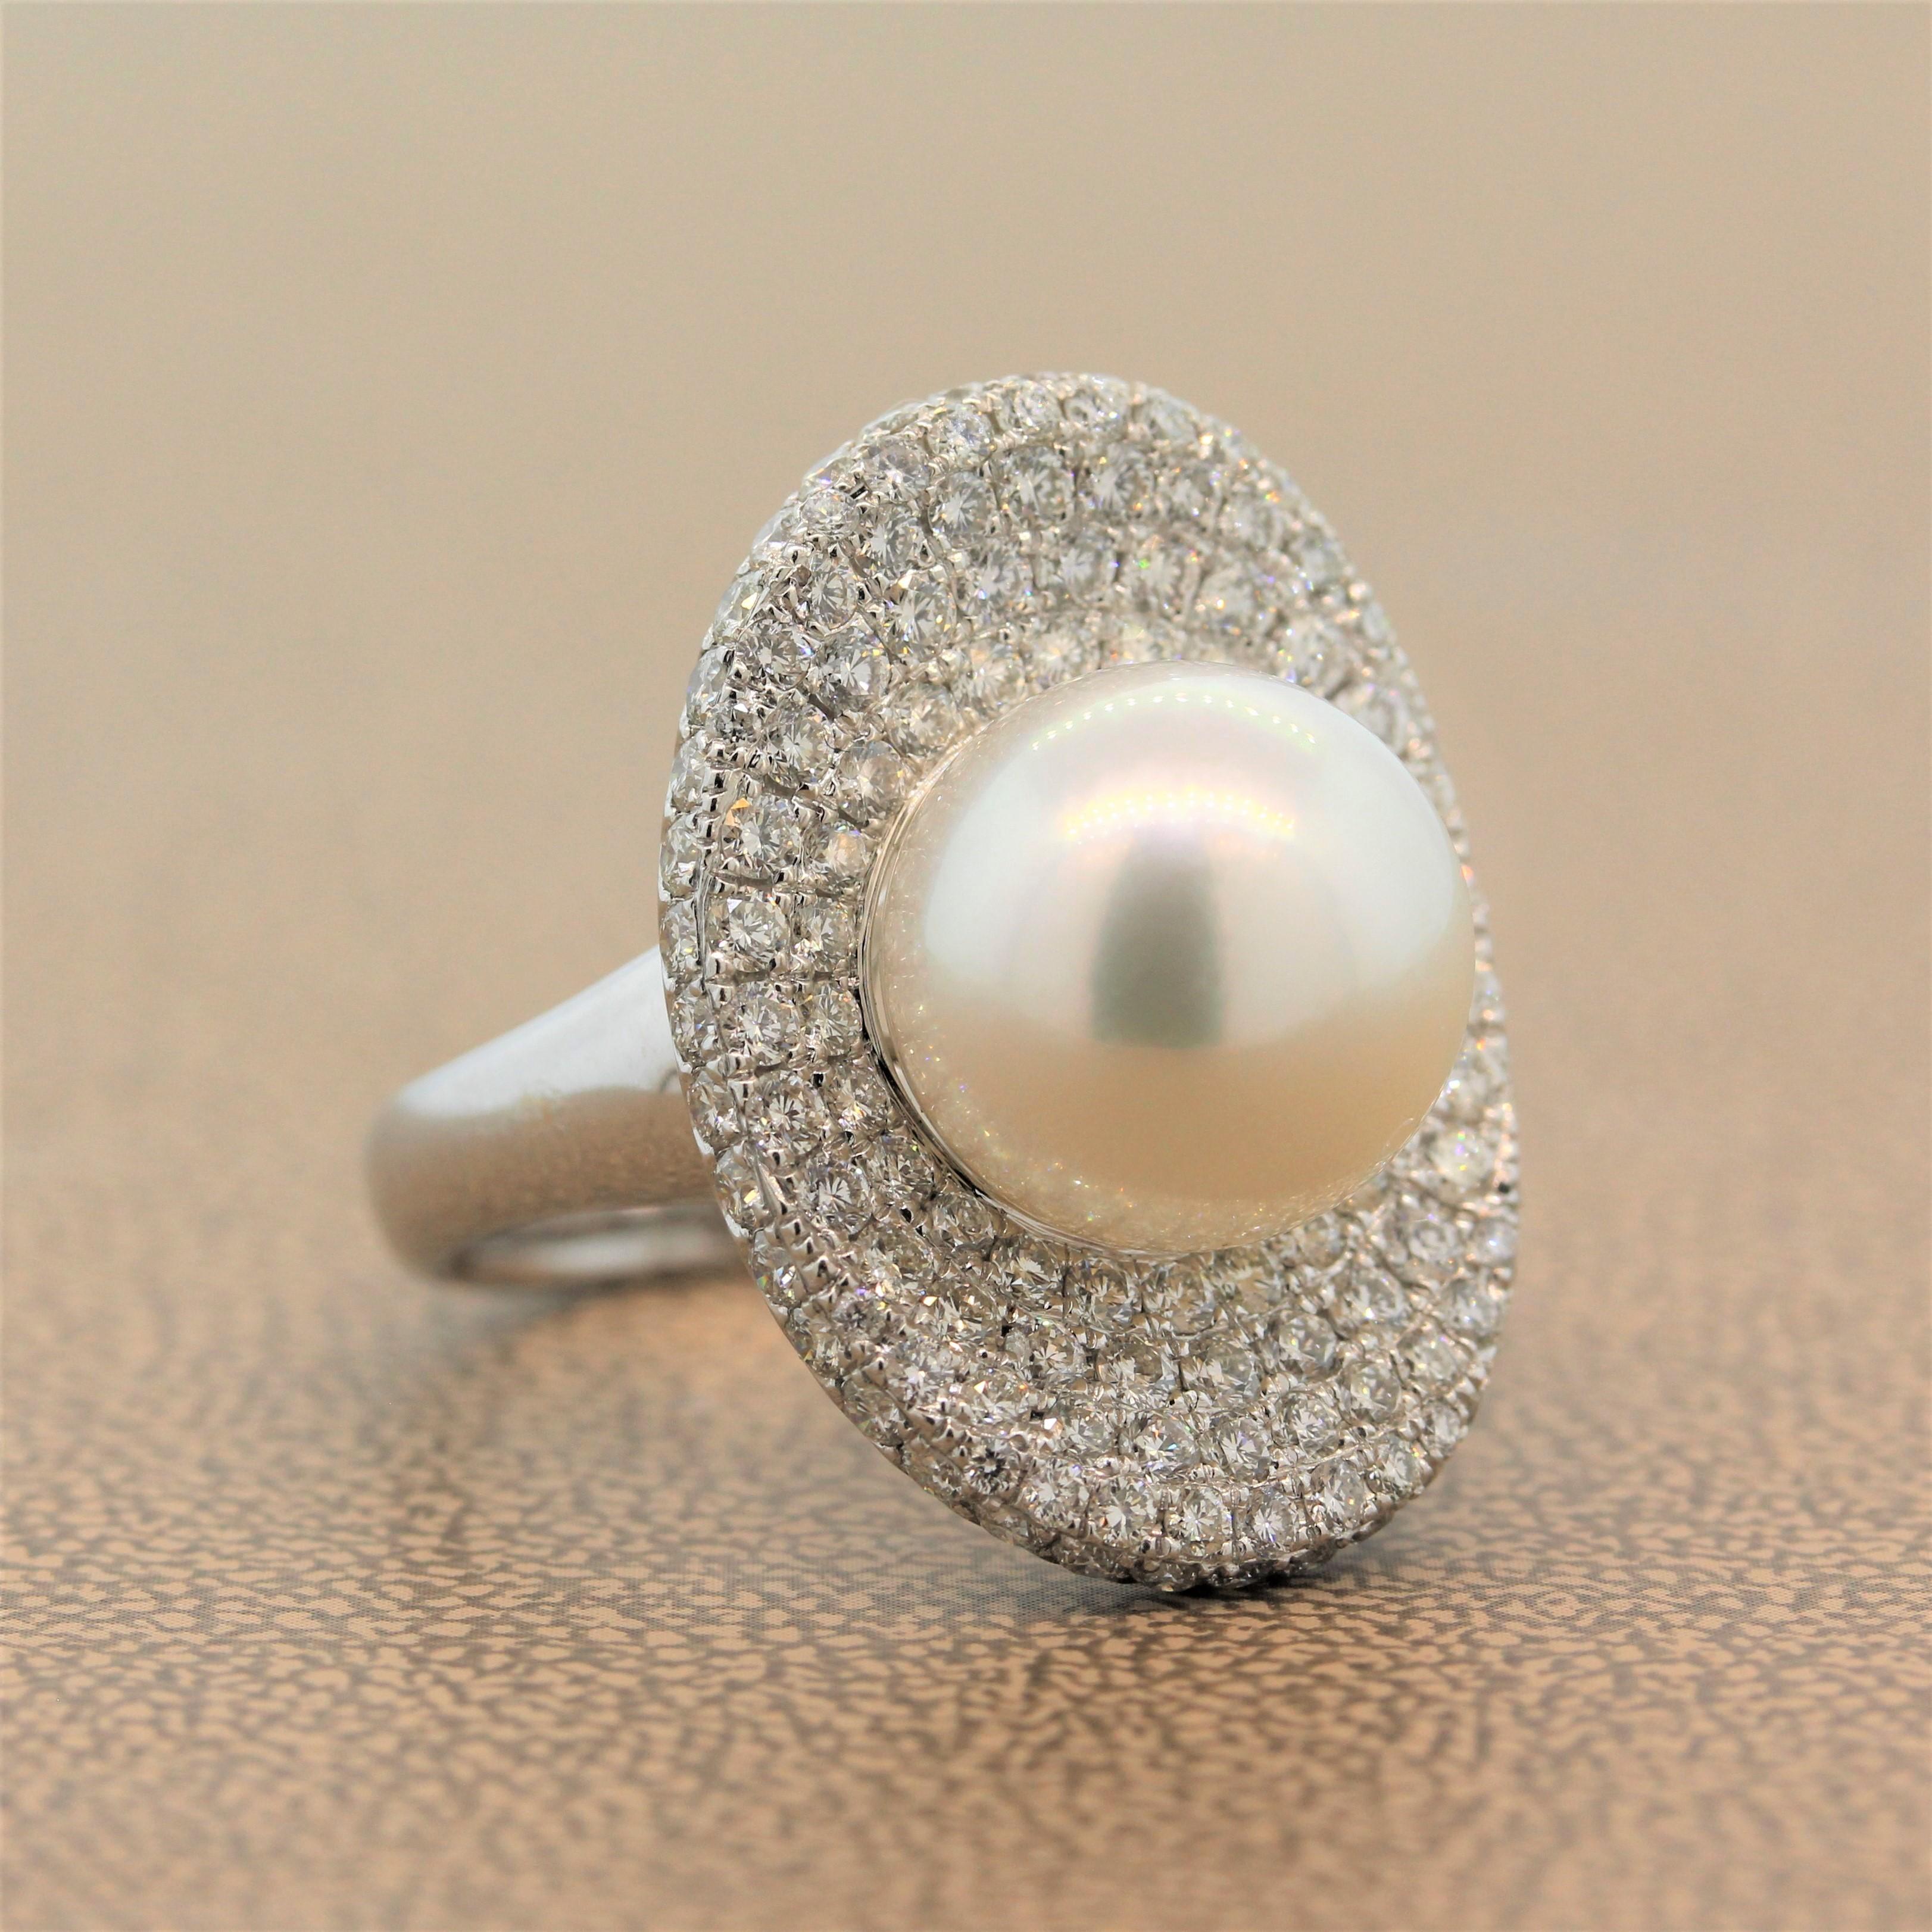 This characterful ring features a 12mm South Sea pearl in the center of a concave oval shape of this 18K white gold ring. The setting with 2.60 carats of shimmering round cut diamonds is reminiscent of a pearls shell. This cocktail ring is delicate